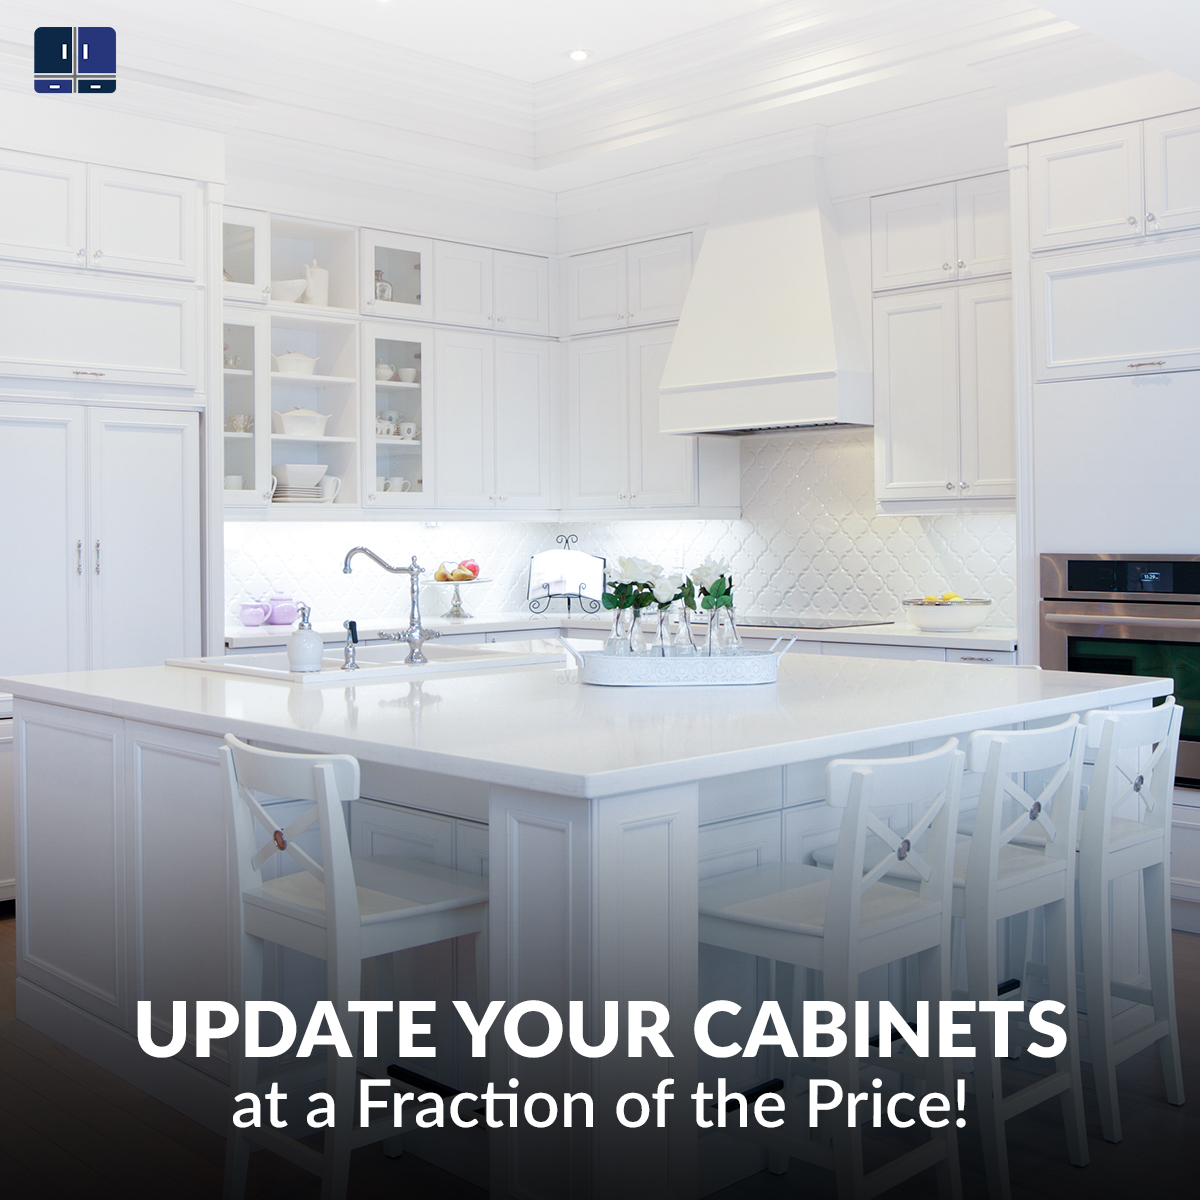 Update your cabinets at a fraction of the price